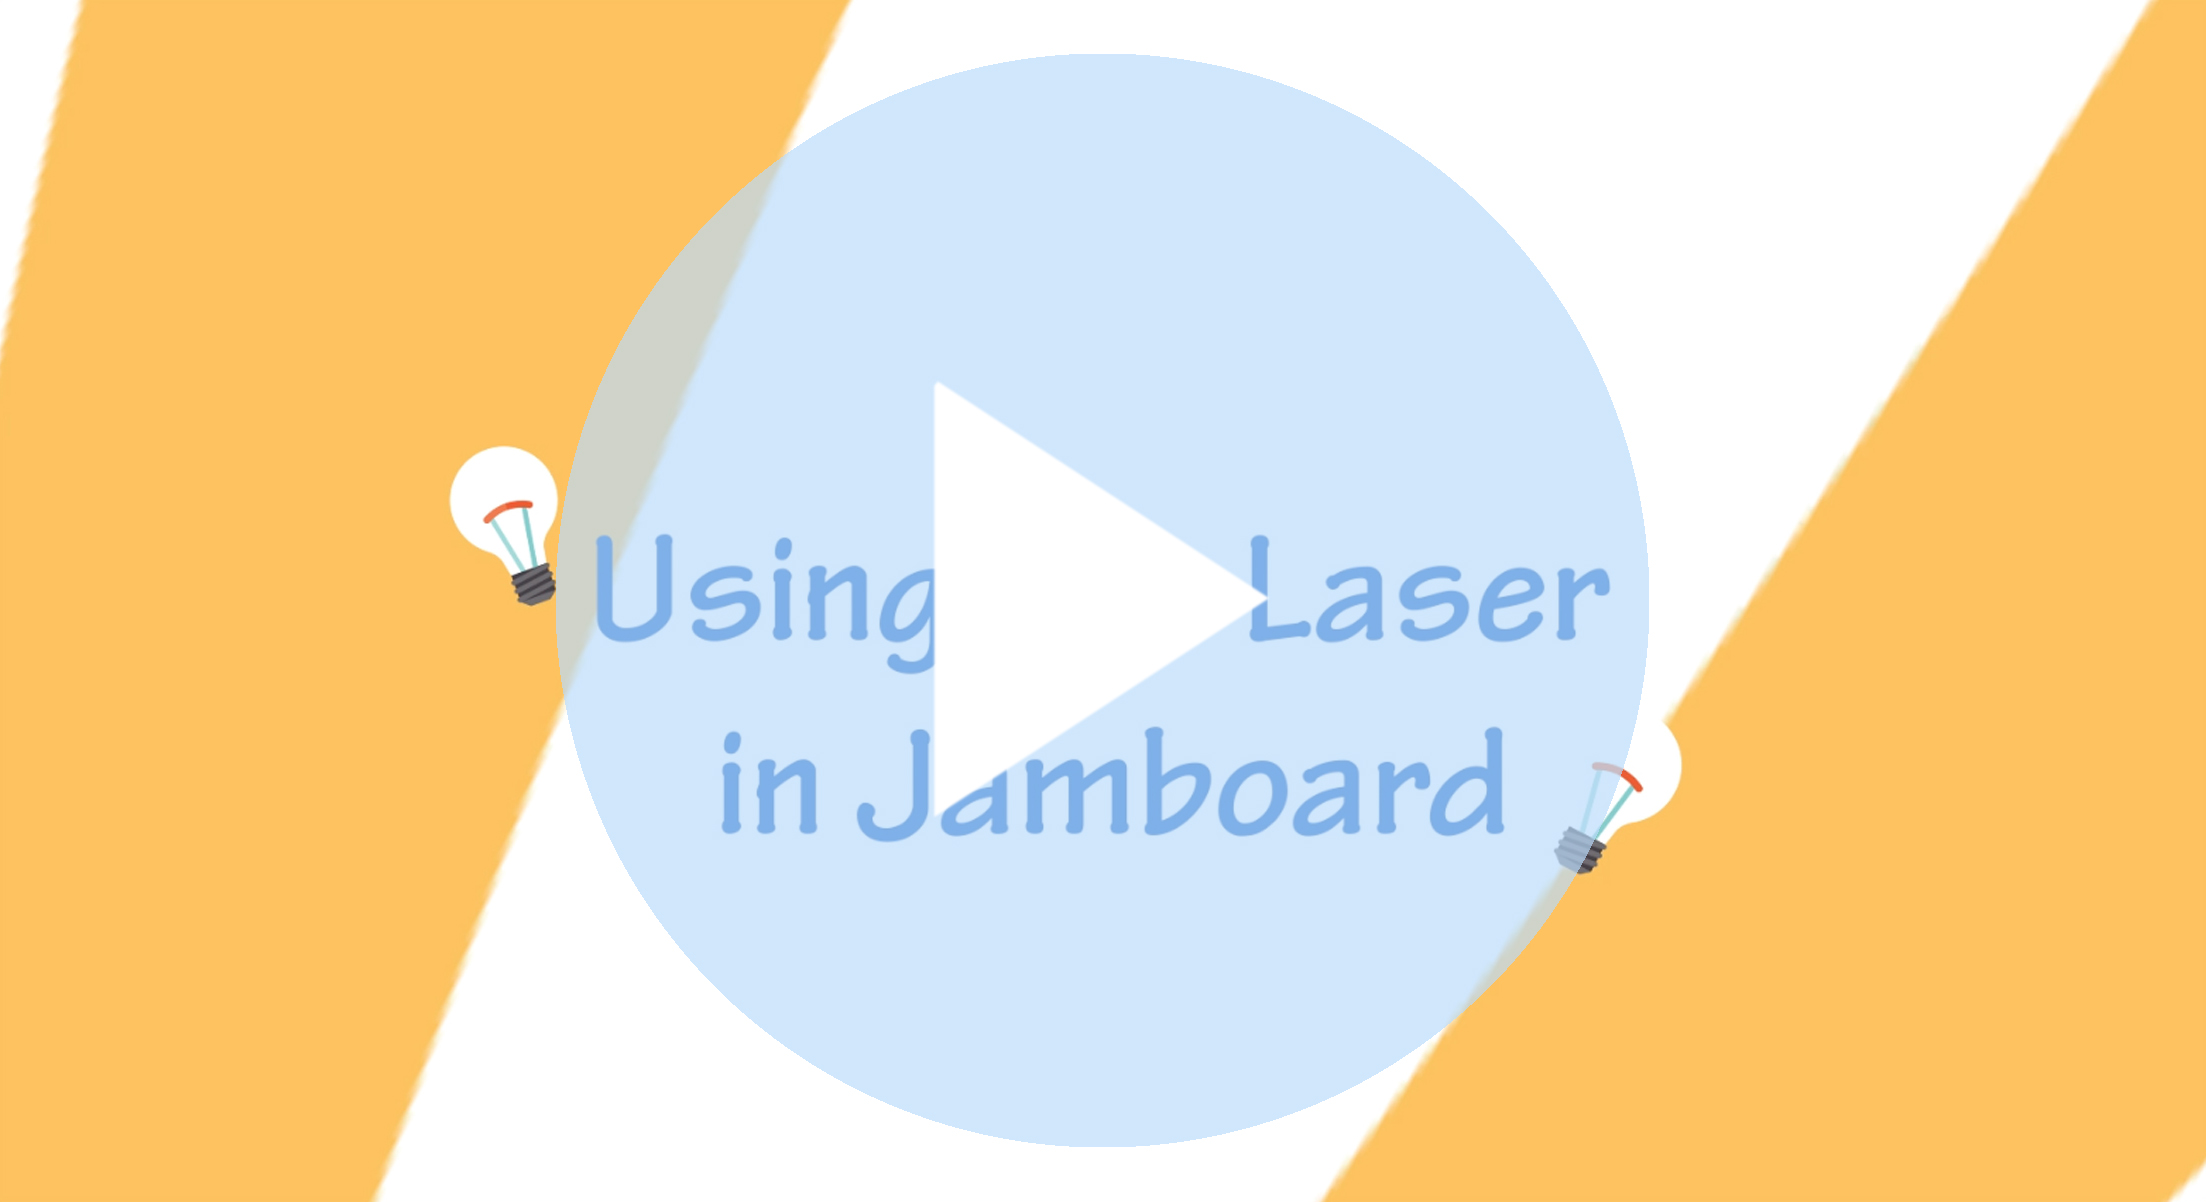 Using the Laser in Jamboard